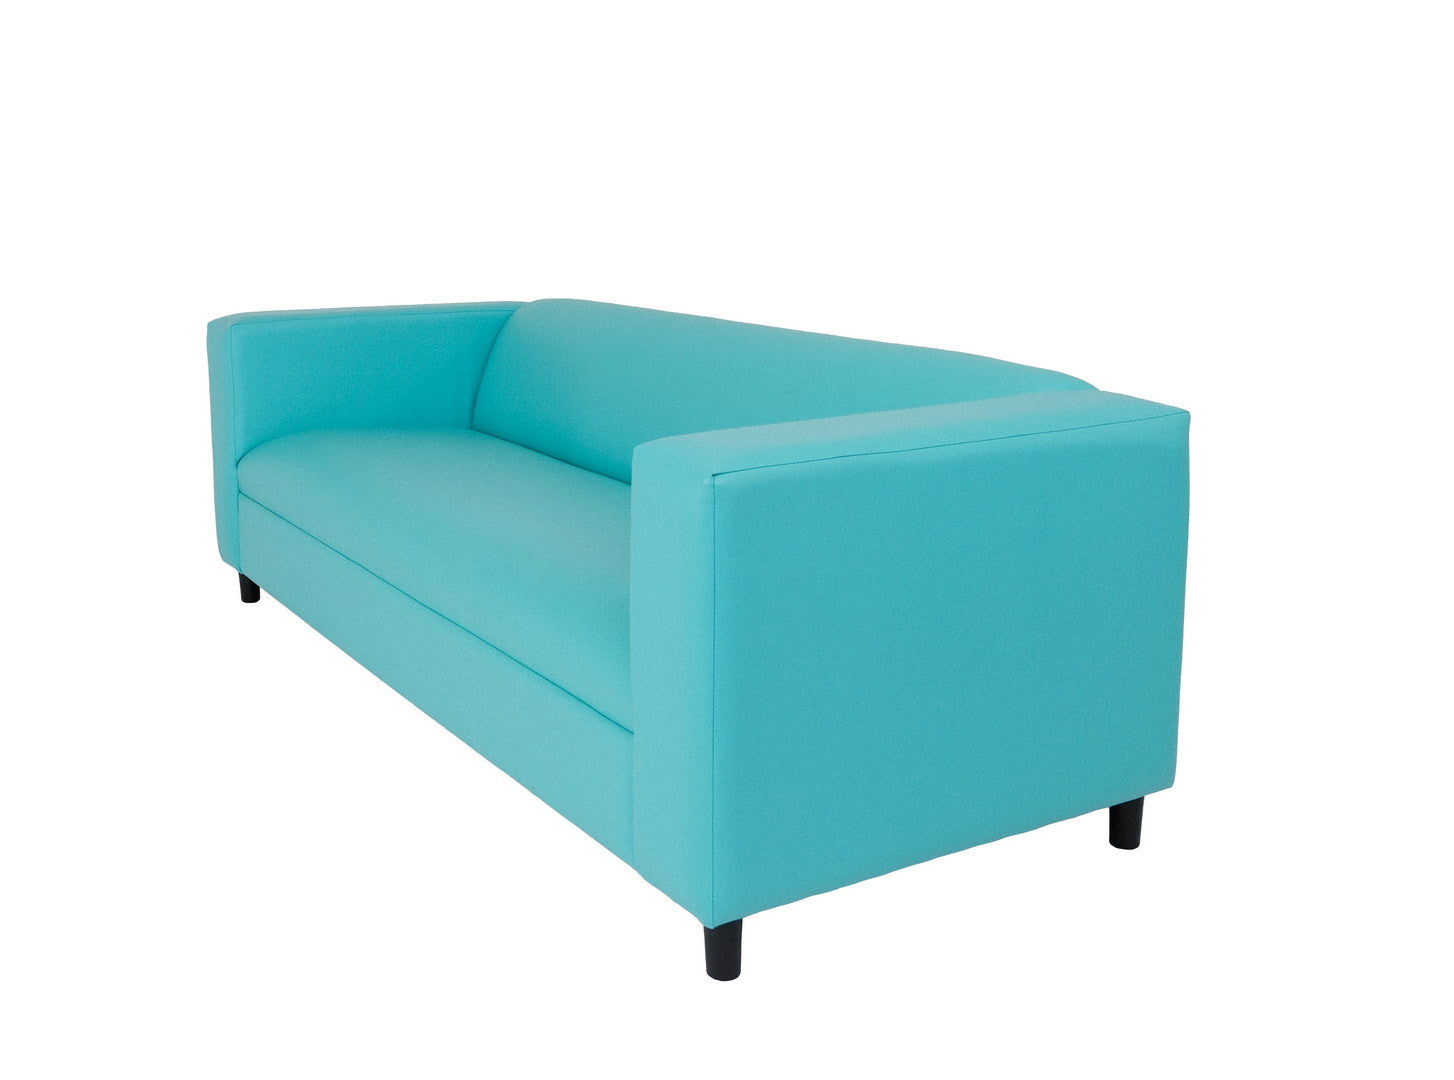 84" Teal Blue Faux Leather And Black Sofa